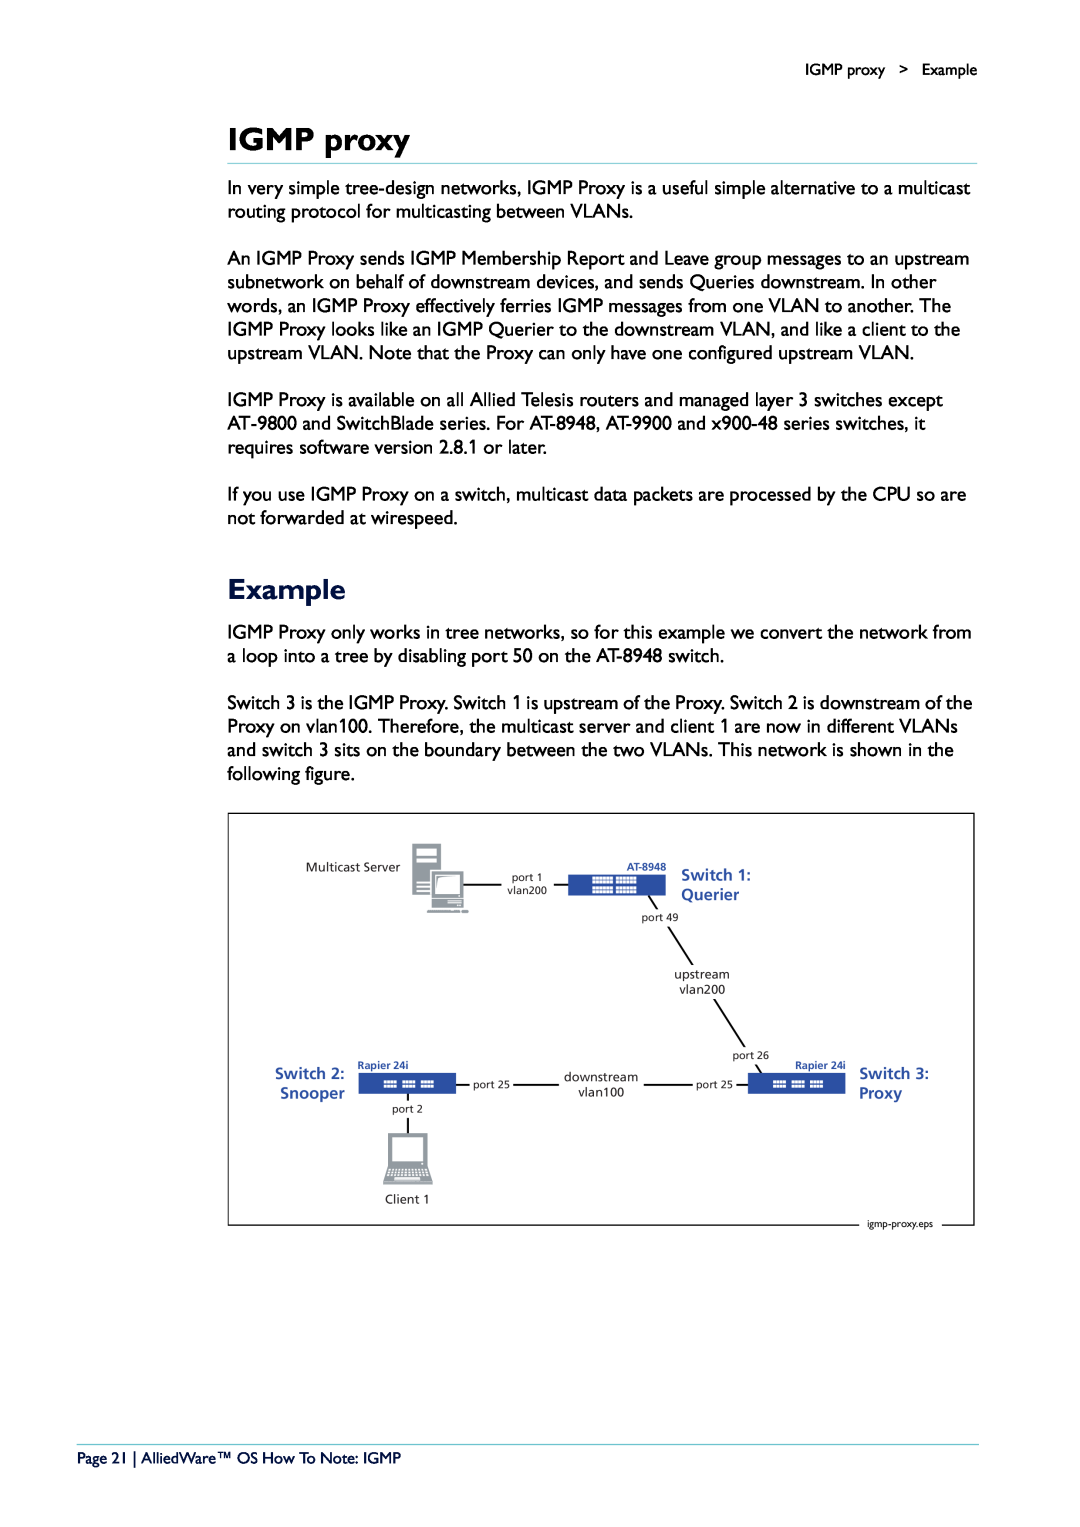 Allied Telesis AR400 manual IGMP proxy, Example, Page 21 AlliedWare OS How To Note IGMP 